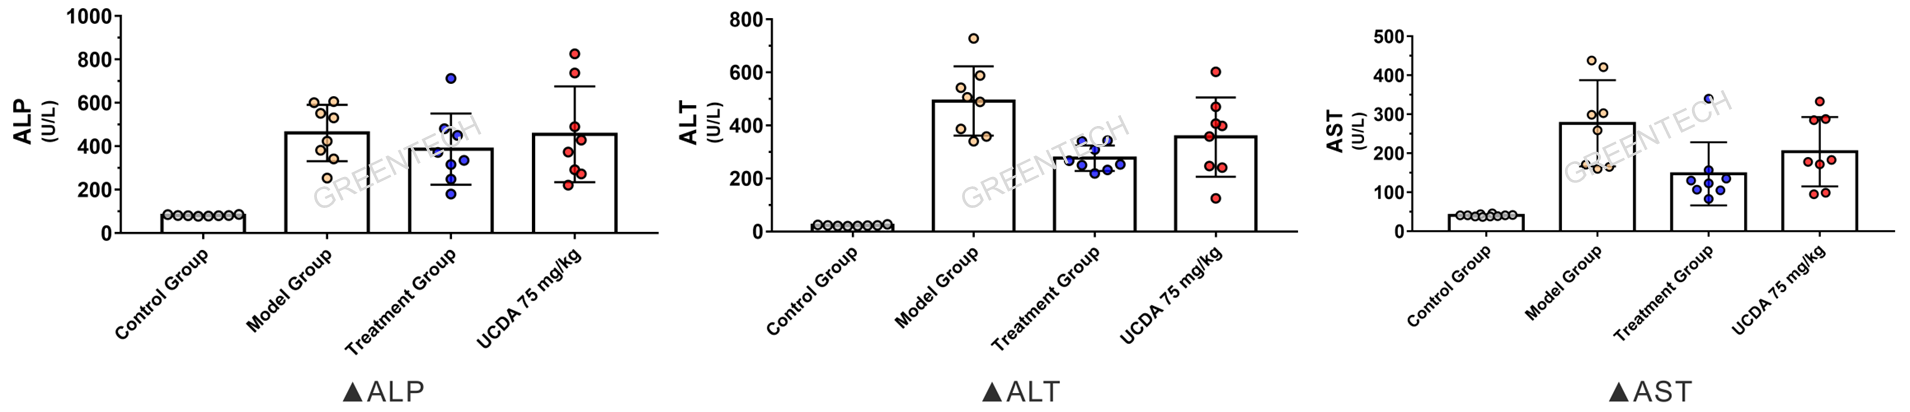 Evaluation of function of liver and gall in C57 mice feeding on 0.1% DDC diet for 8 weeks.png